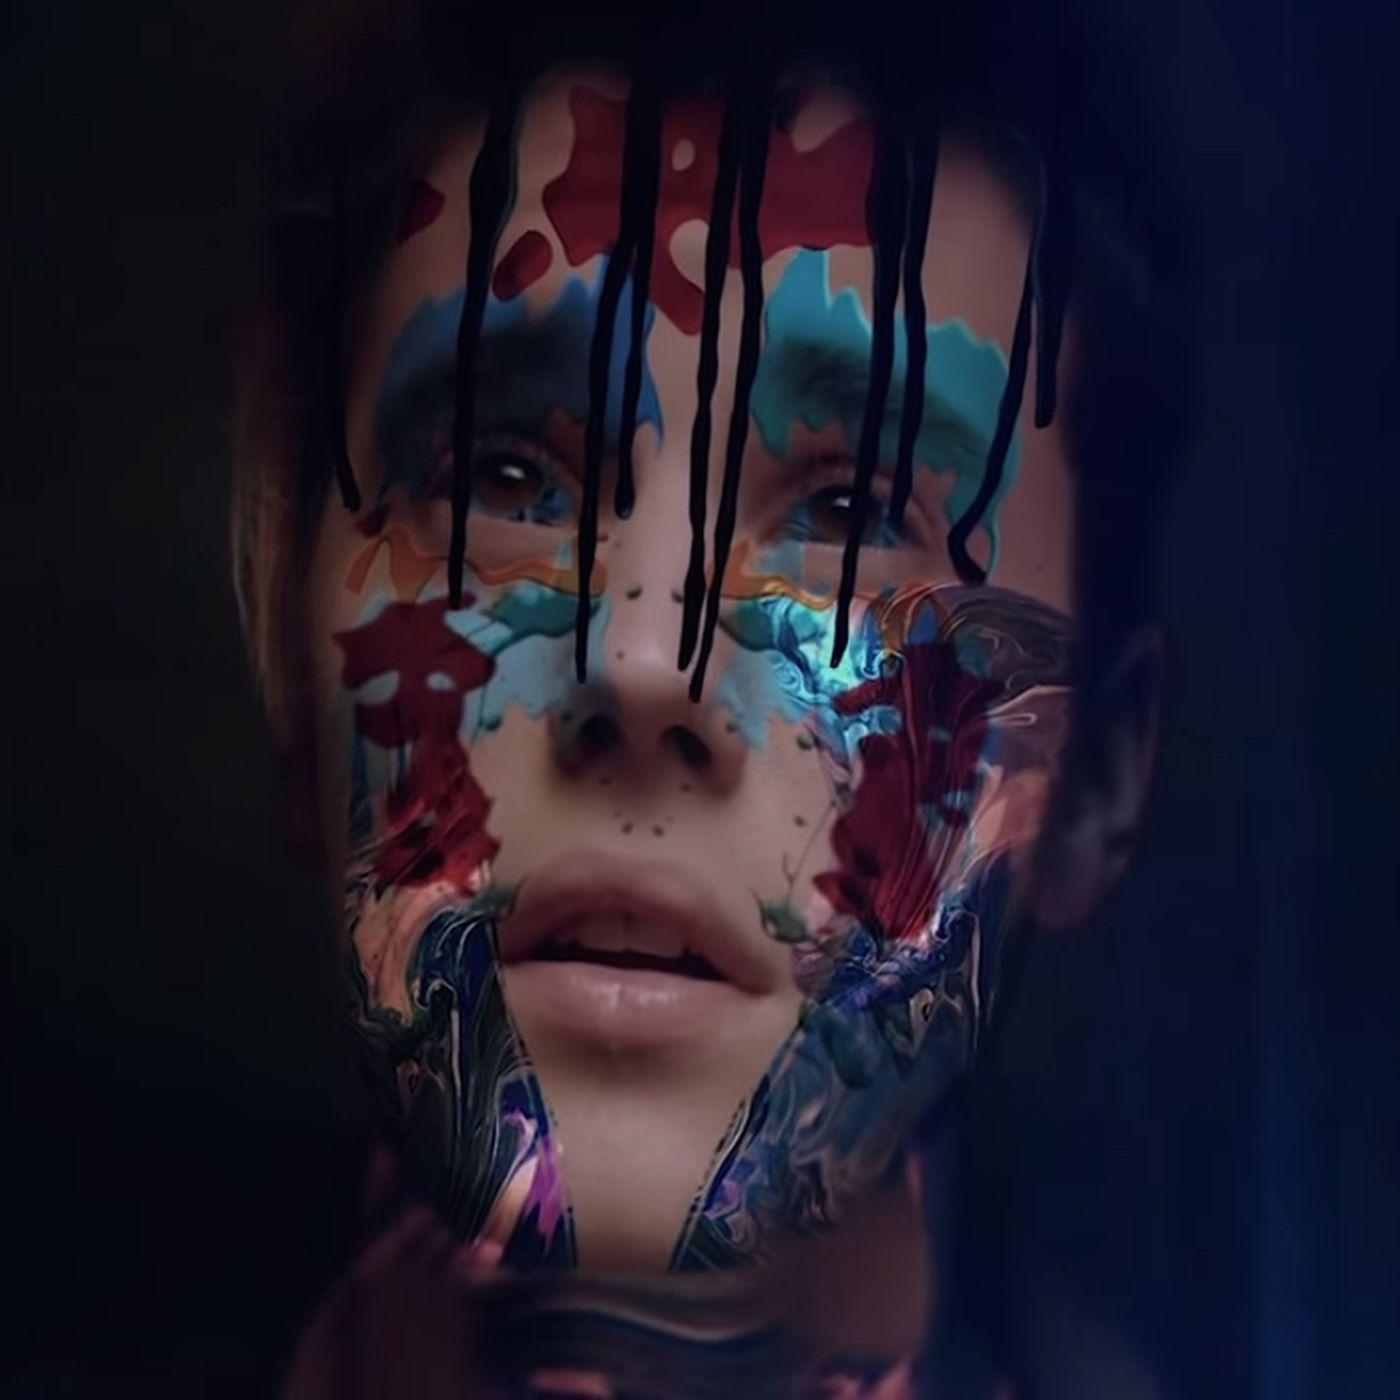 The Where Are Ü Now video and the current cultural function